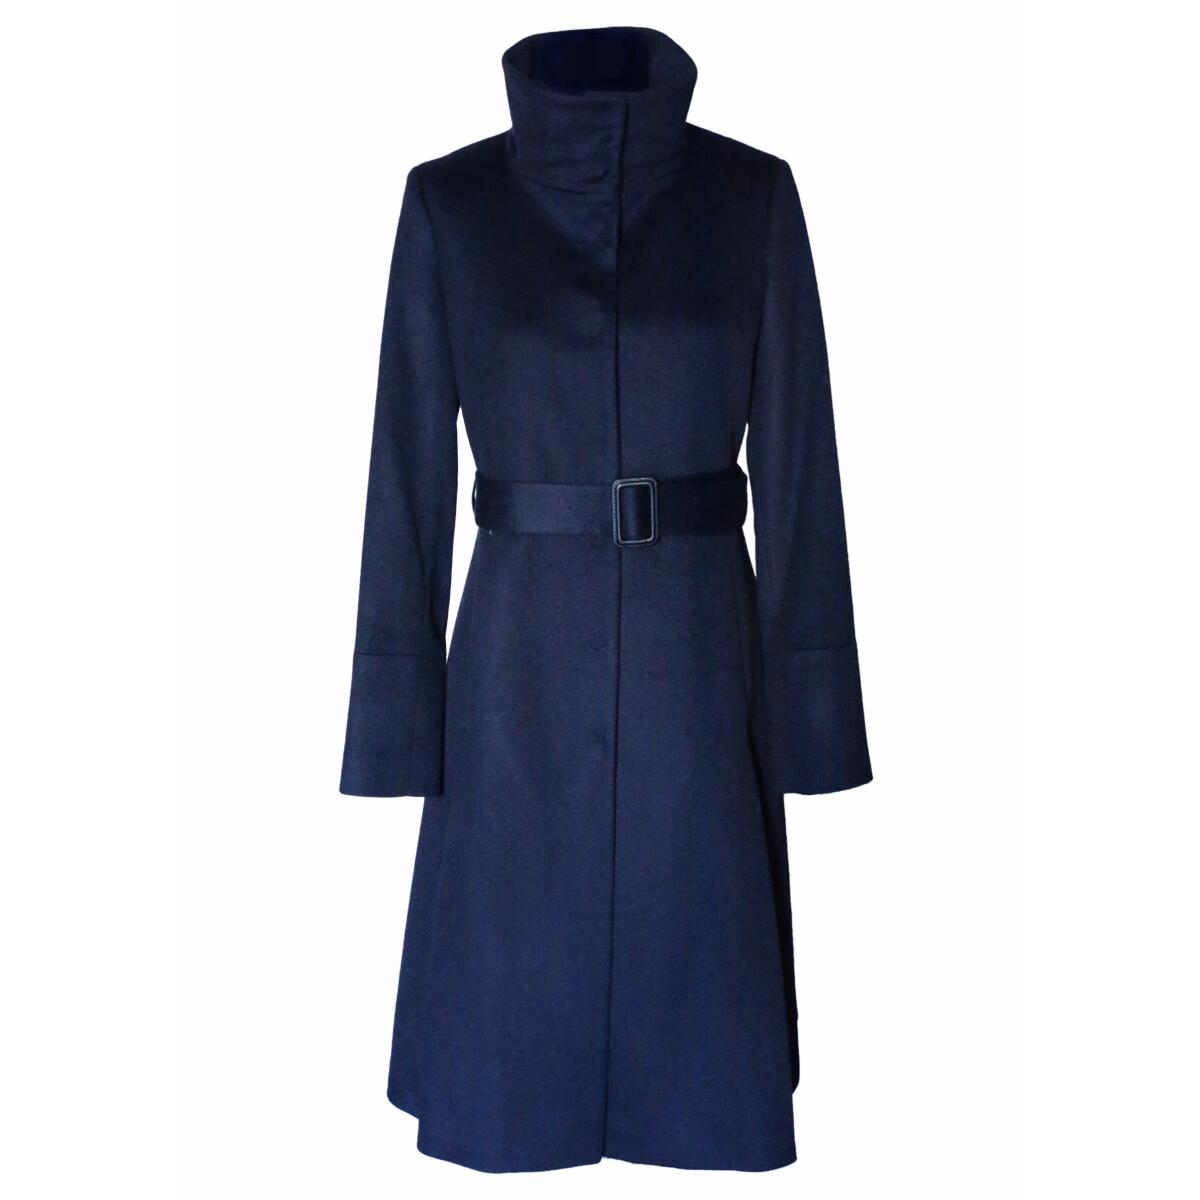 Lan Jaenicke's Hyde woven cashmere skirted trench coat.